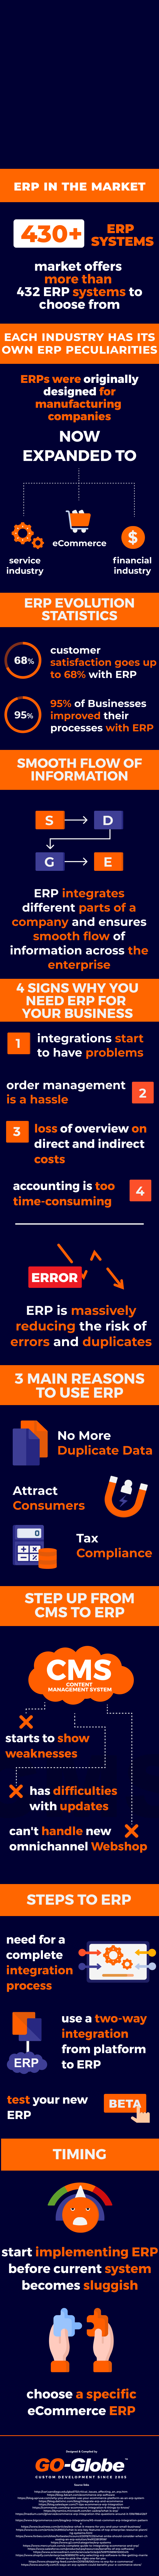 Why Do We Need ERP?